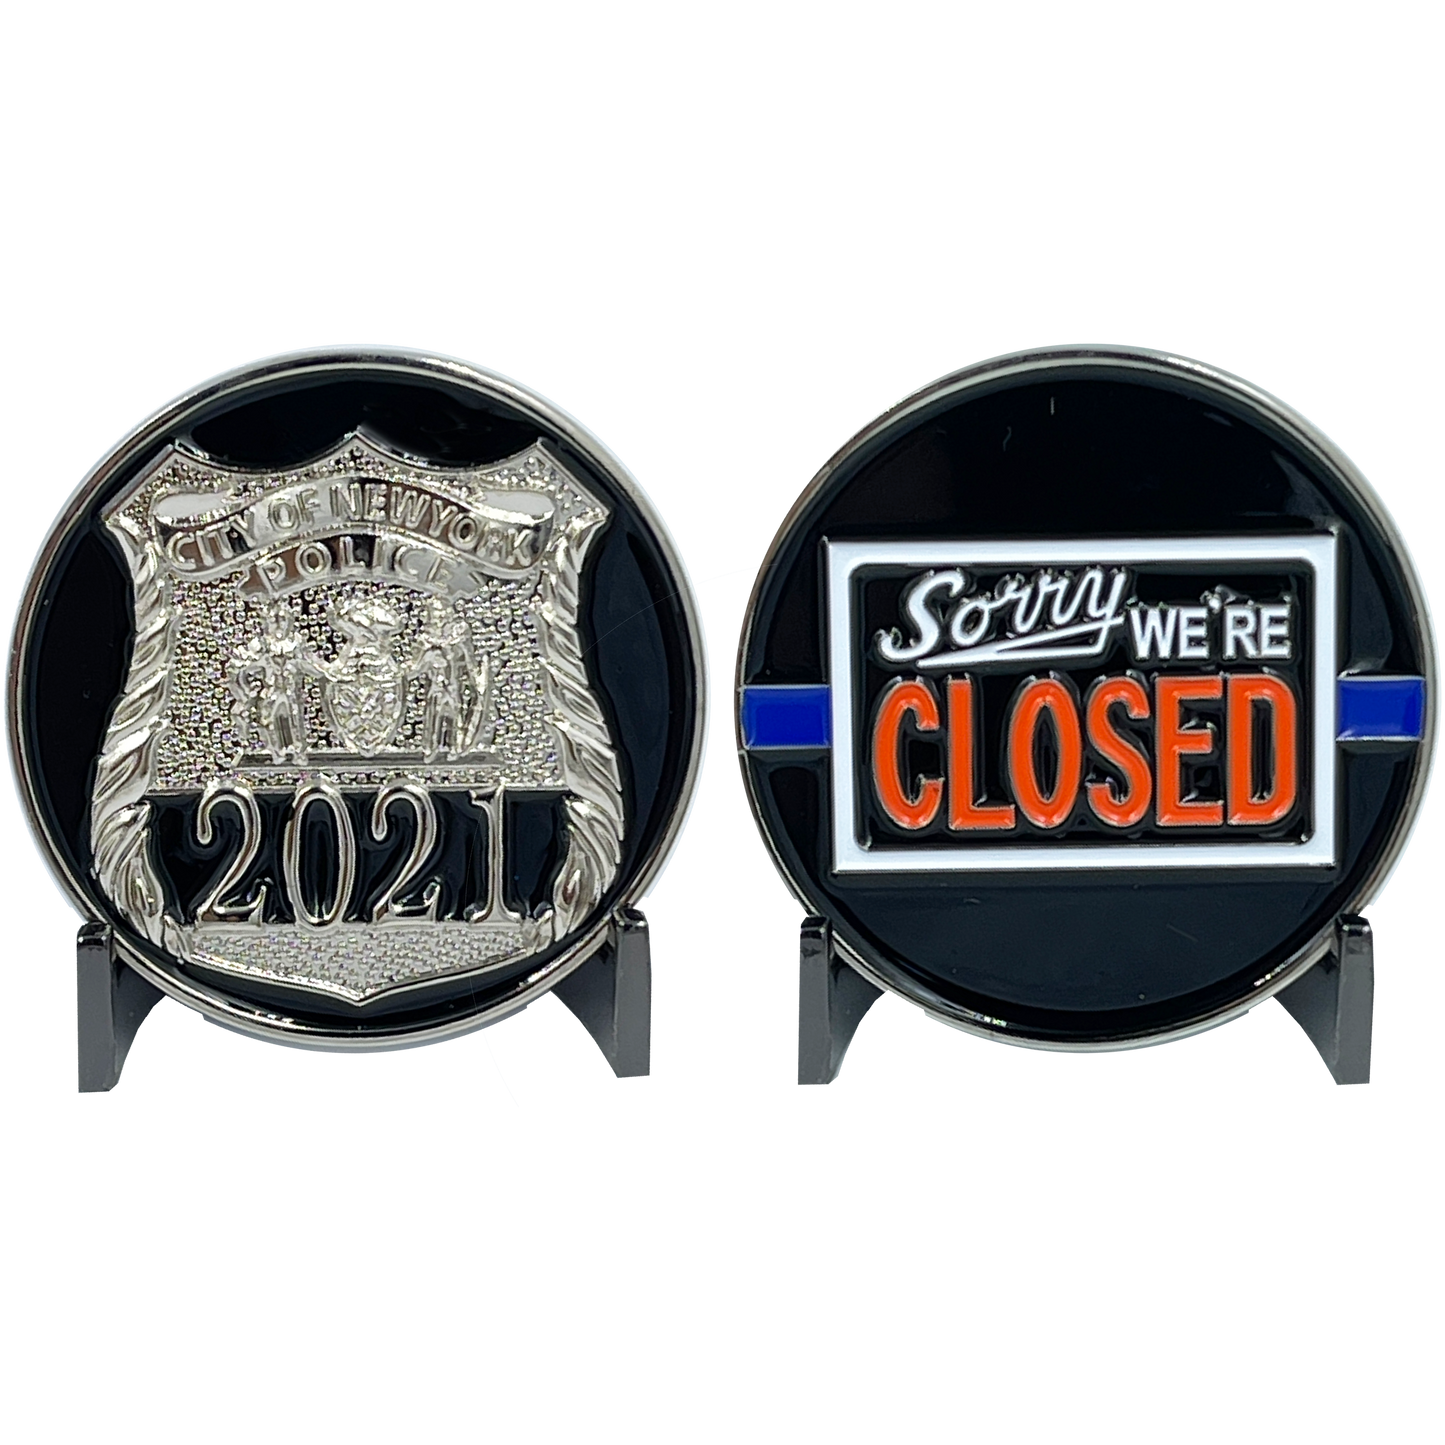 discontinued BL12-004 NYPD Officer New York City Police Department NYC Sorry We're Closed Challenge Coin